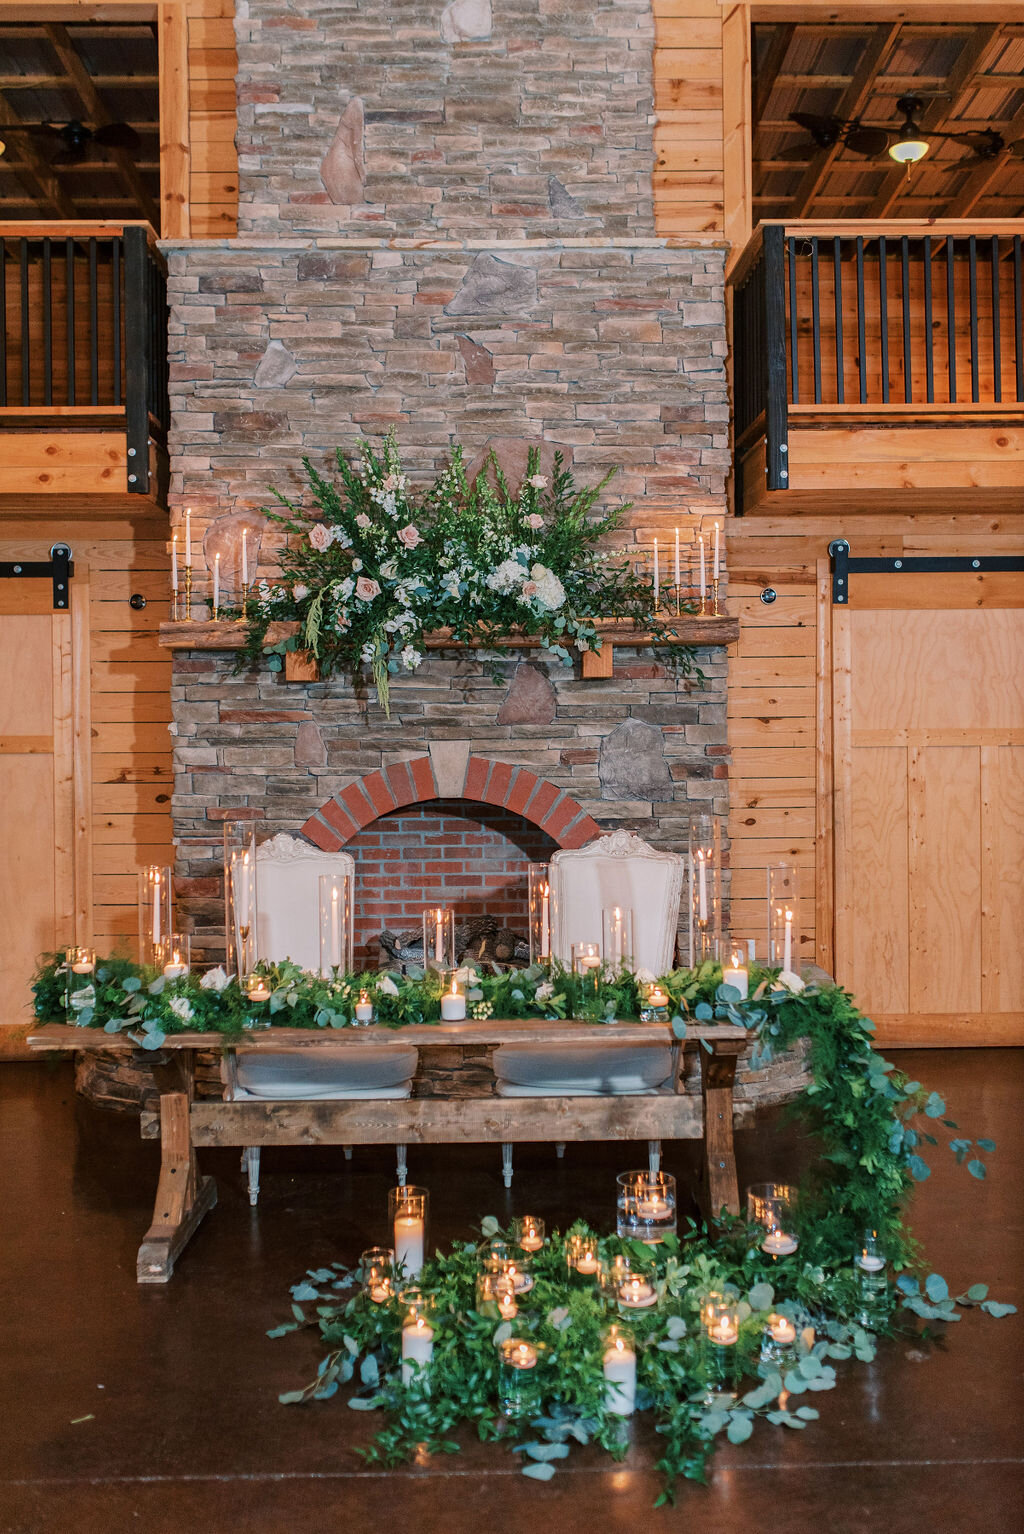 Upgraded mantle and sweetheart table with greenery twh candles garland hurricanes.jpg